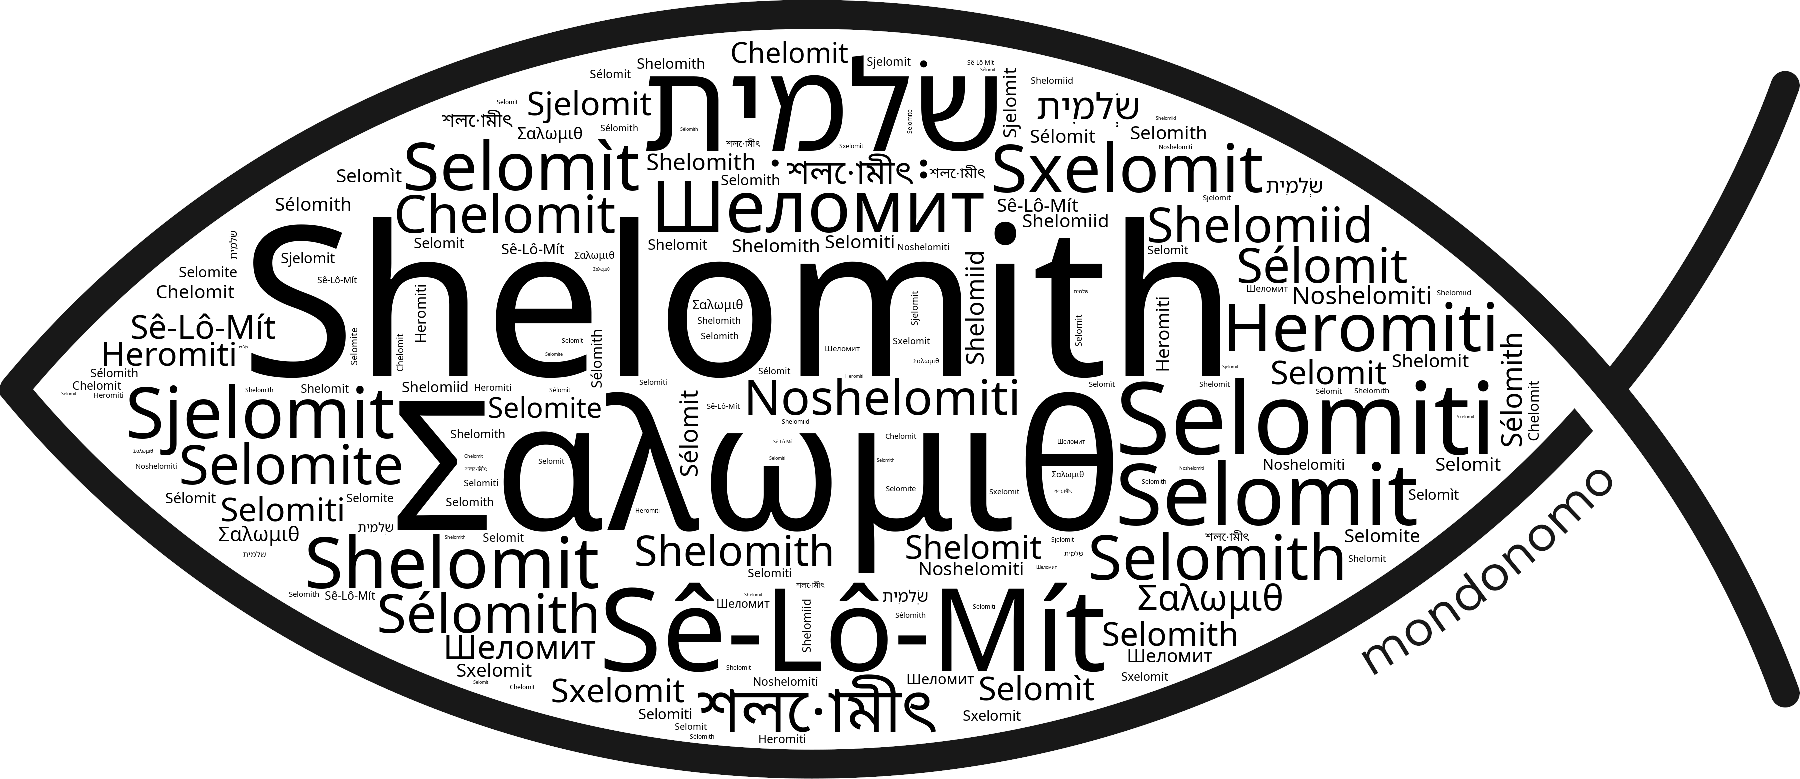 Name Shelomith in the world's Bibles